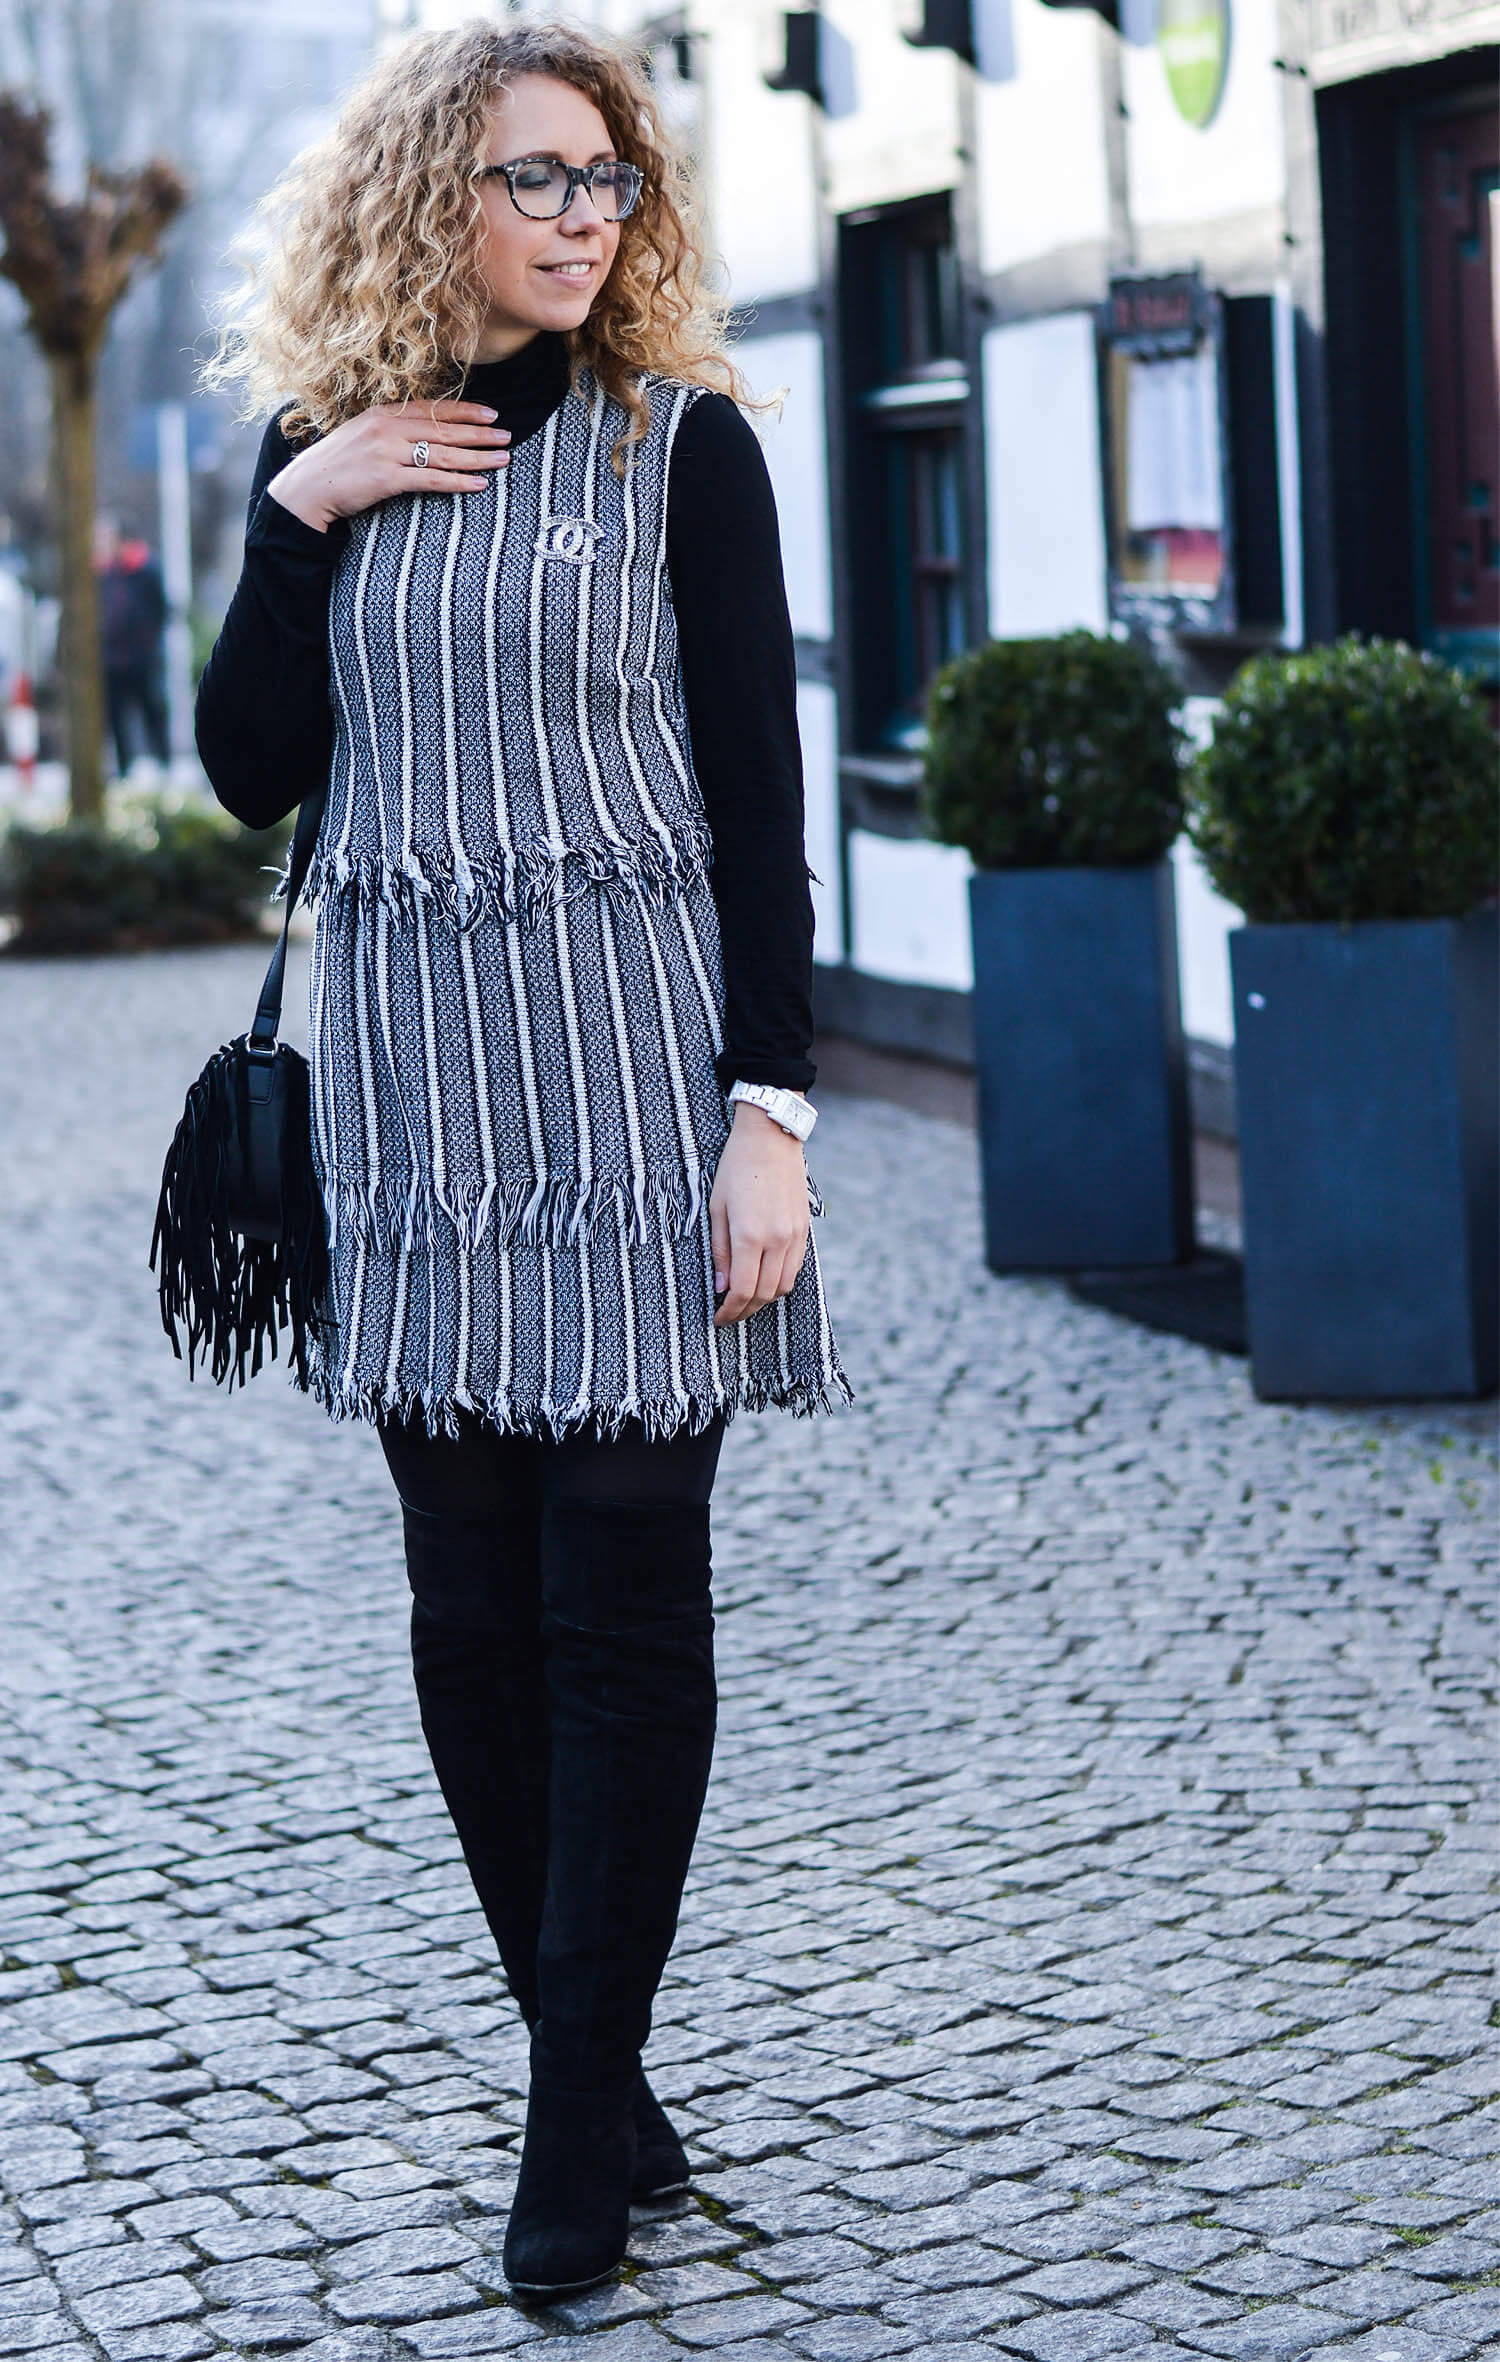 Kationette-fashionblog-nrw-outfit-Tweed-Dress-Chanel-Brooch-Overknees-streetstyle-curls